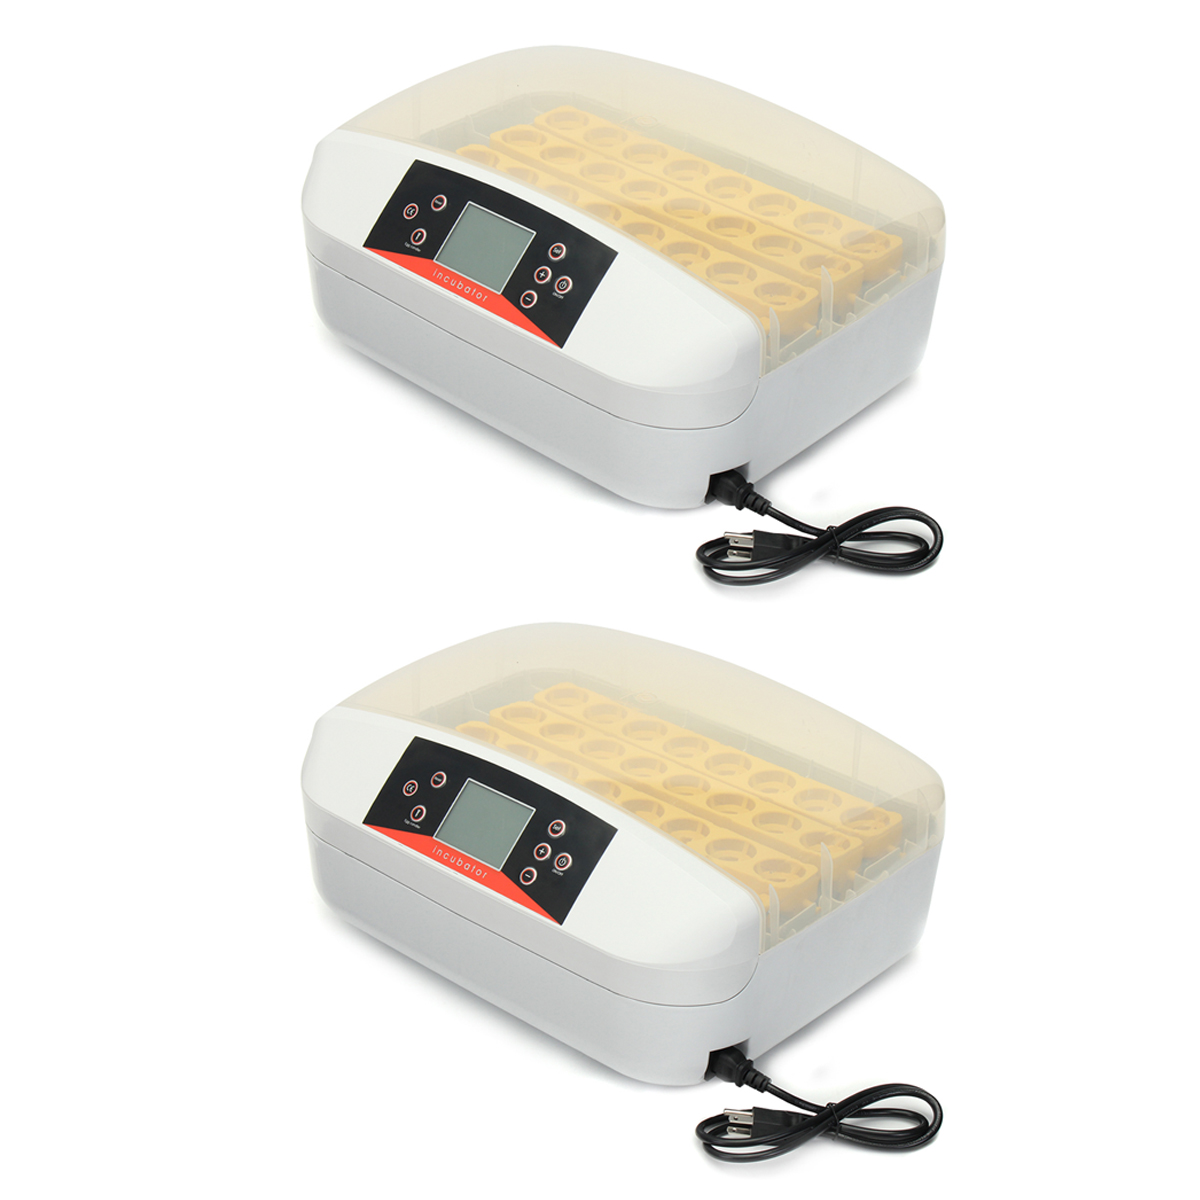 32 Position Electronic Digital Incubator Automatic Hatcher for Poultry Eggs Chicken Egg 7